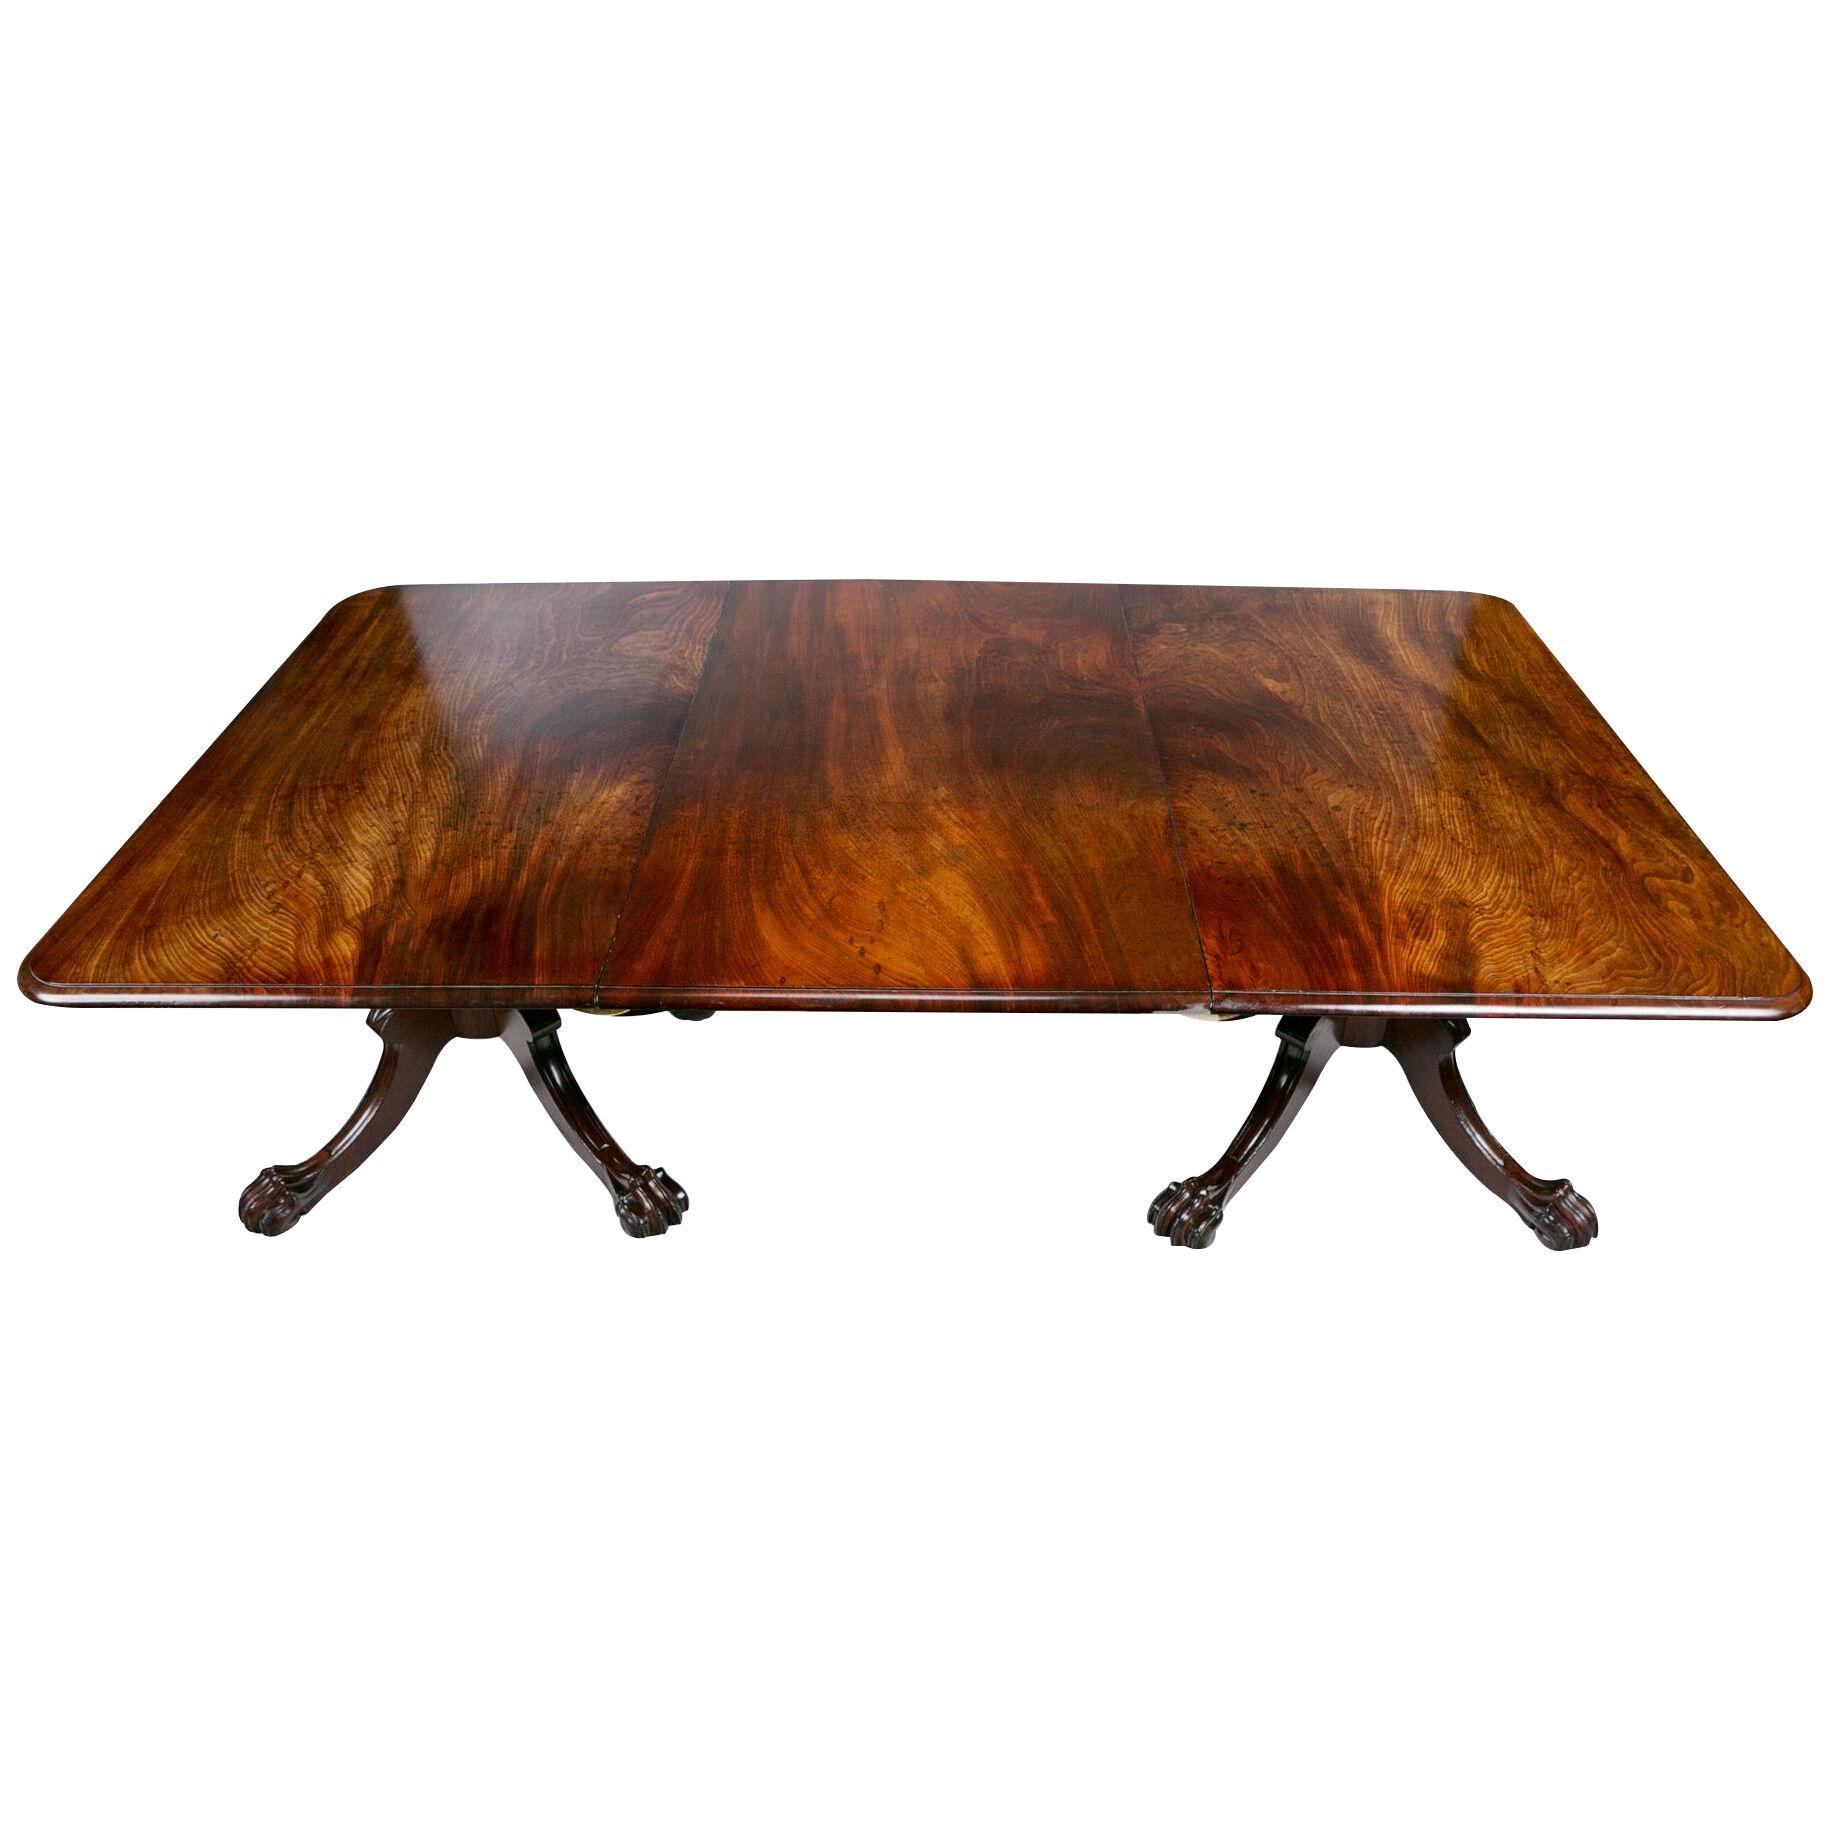 Early 19th Century Regency Dining Table